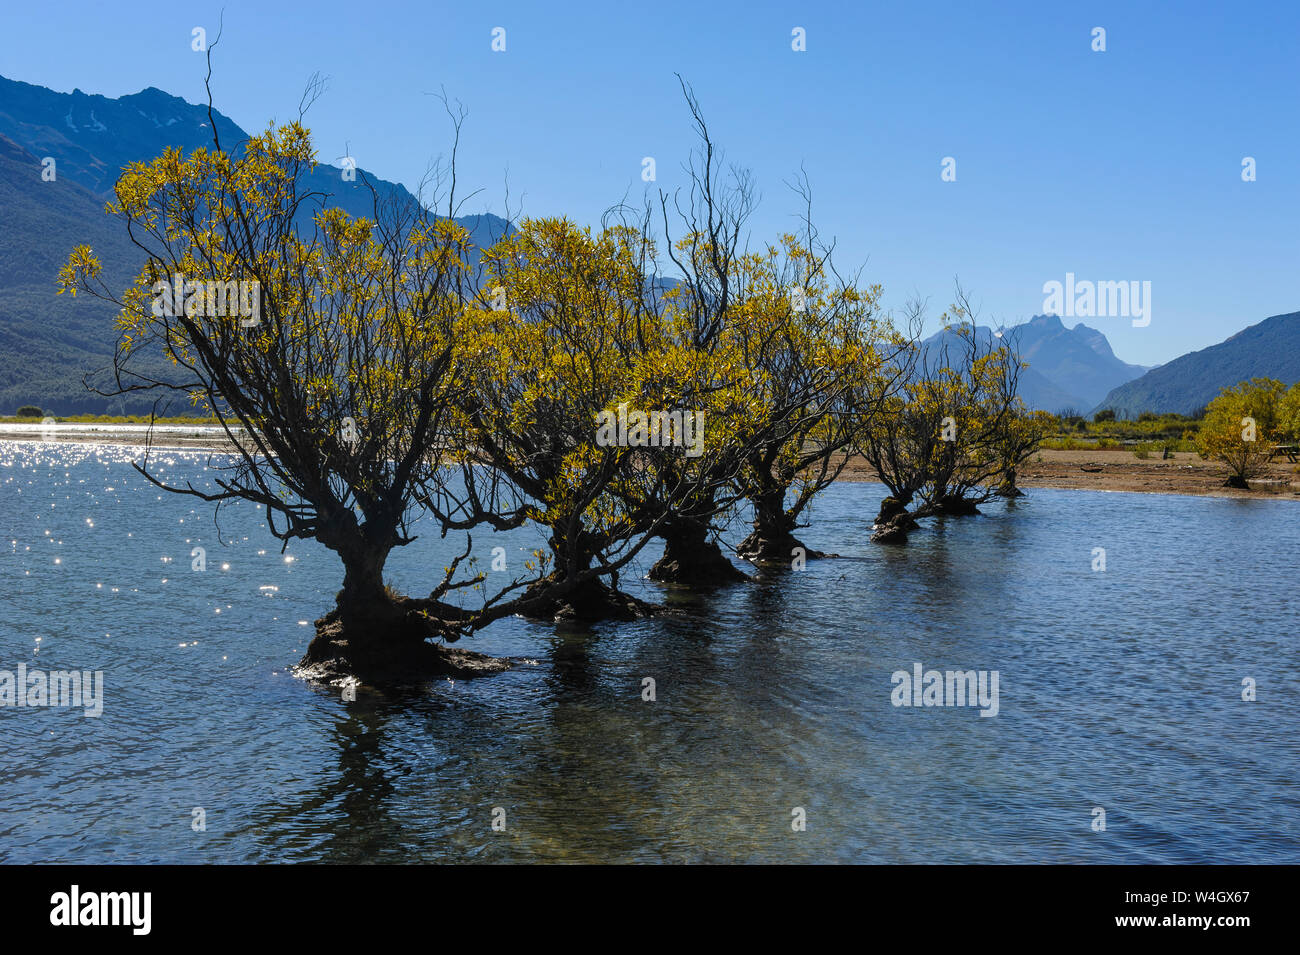 Row of trees in the water of Lake Wakaipu, Glenorchy around Queenstown, South Island, New Zealand Stock Photo